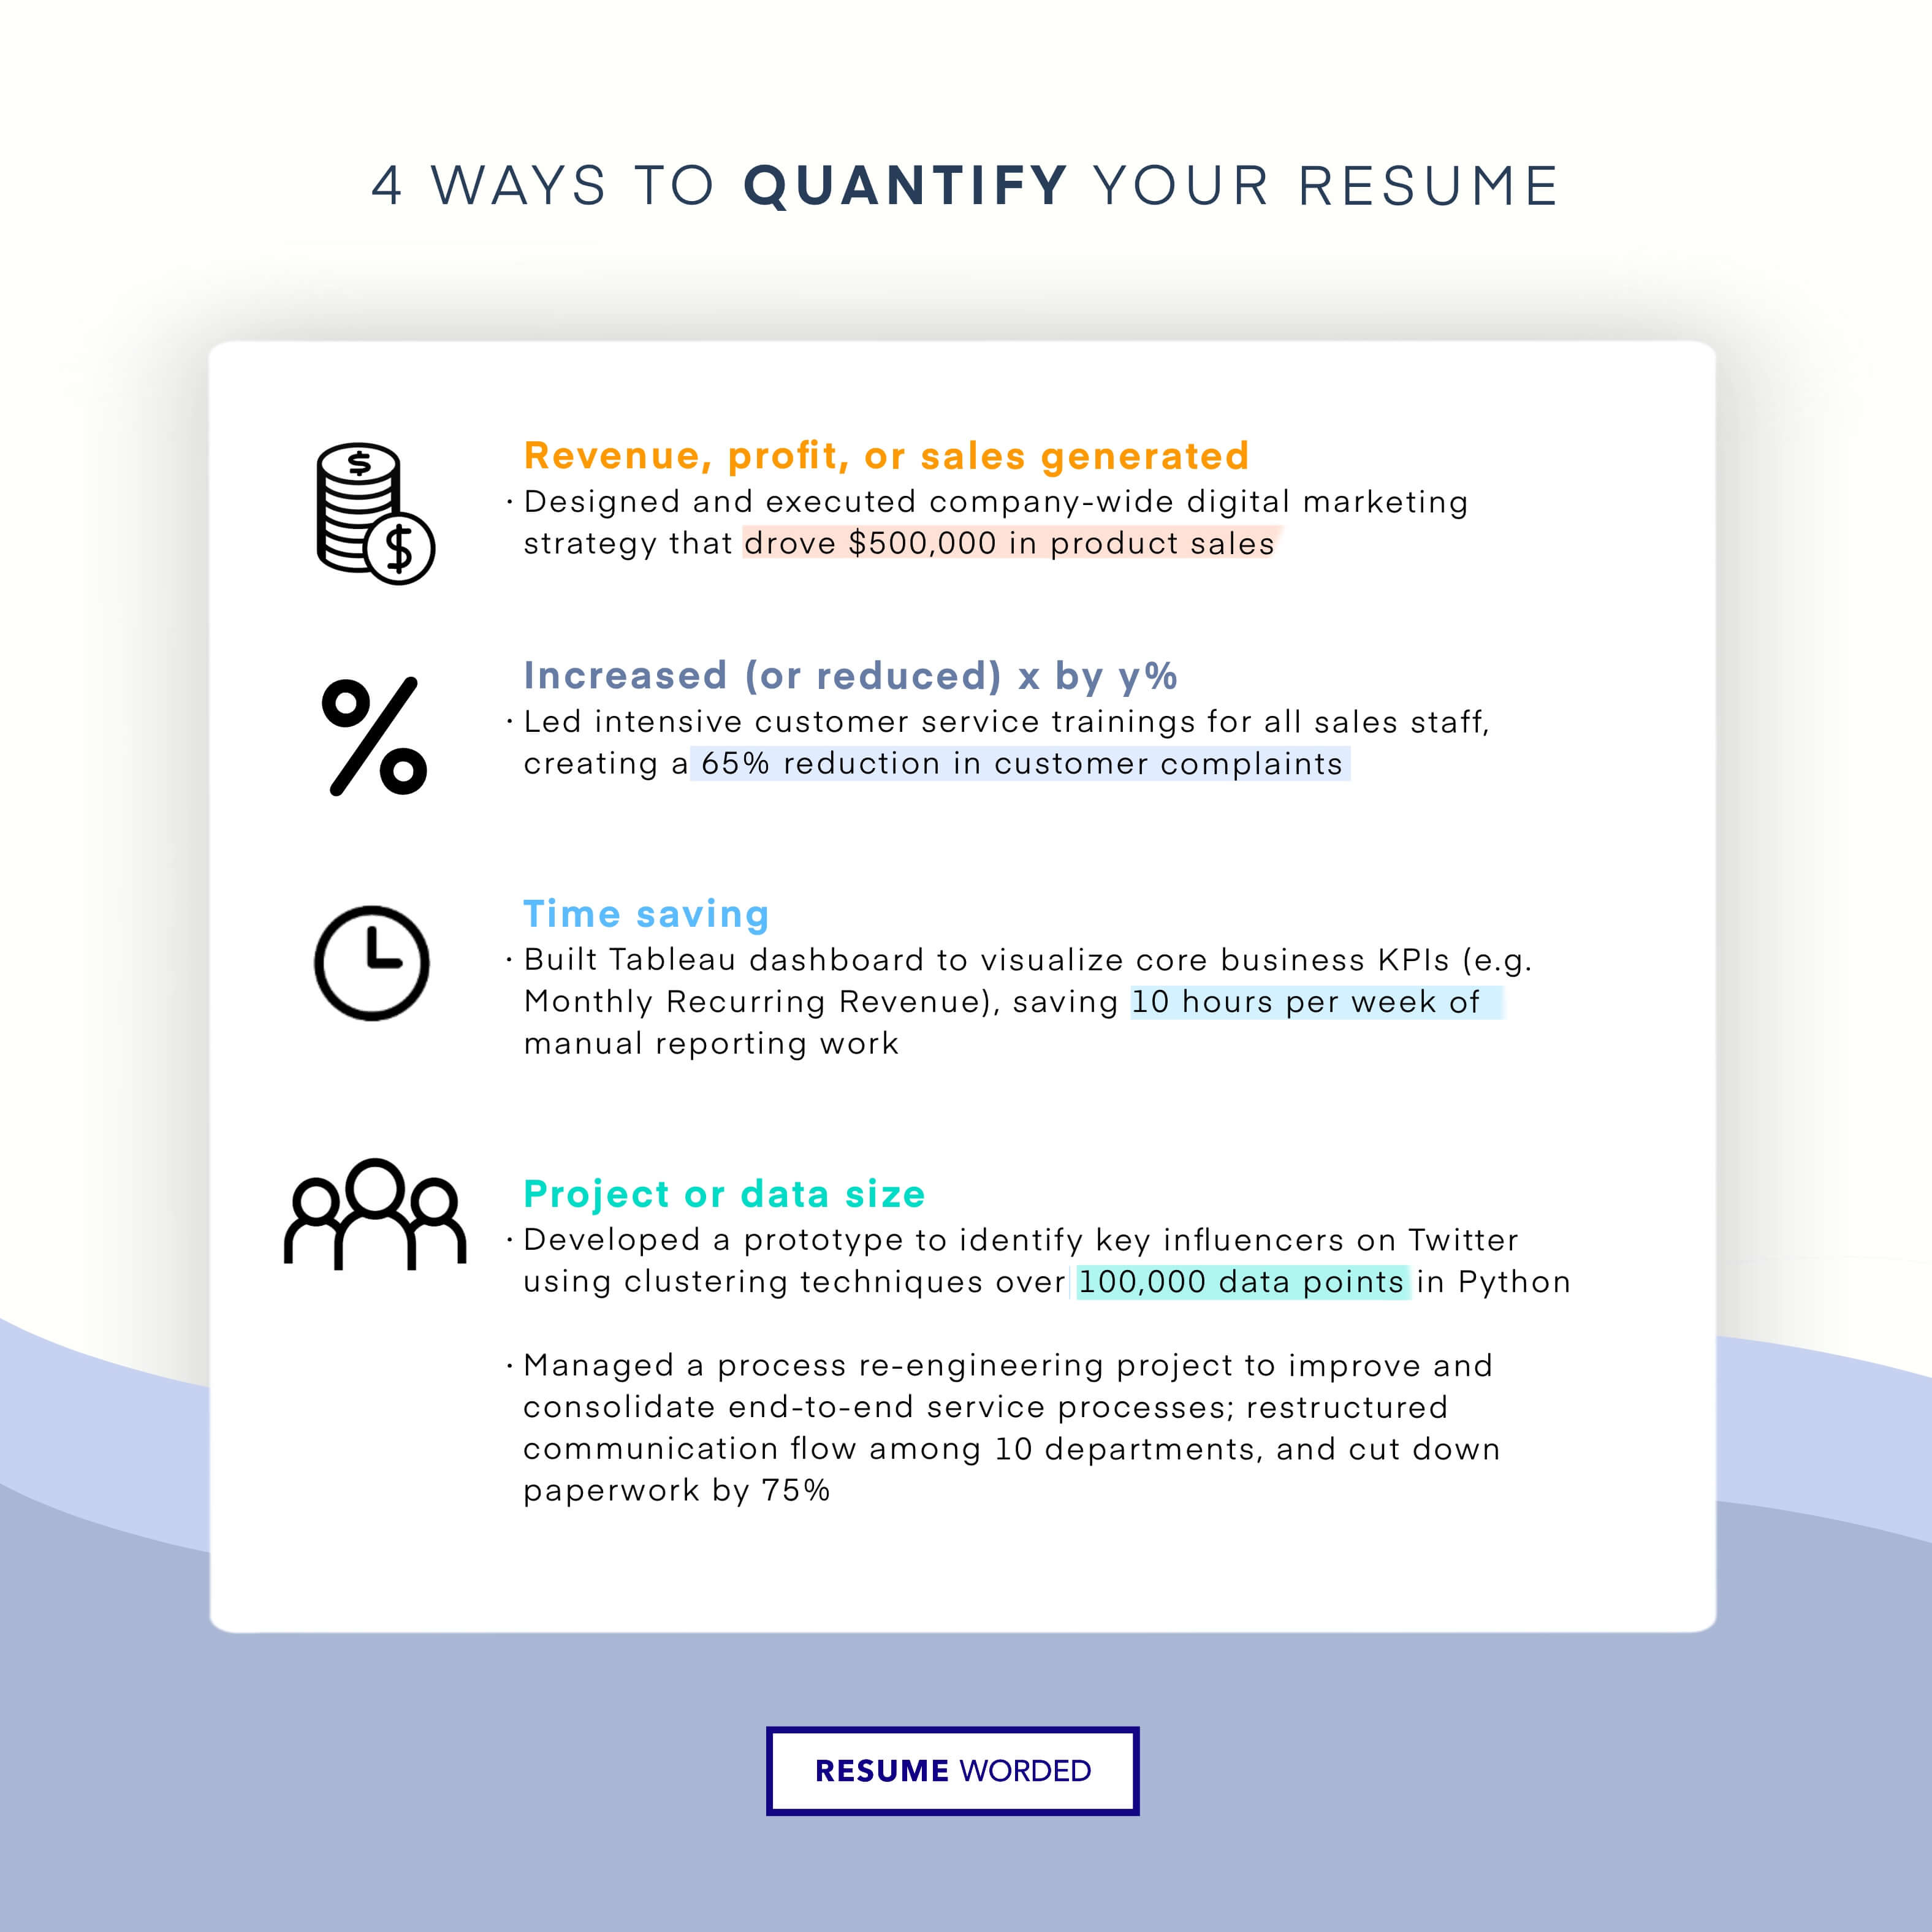 Quantify your workload capabilities. - Investment Banking Analyst Resume